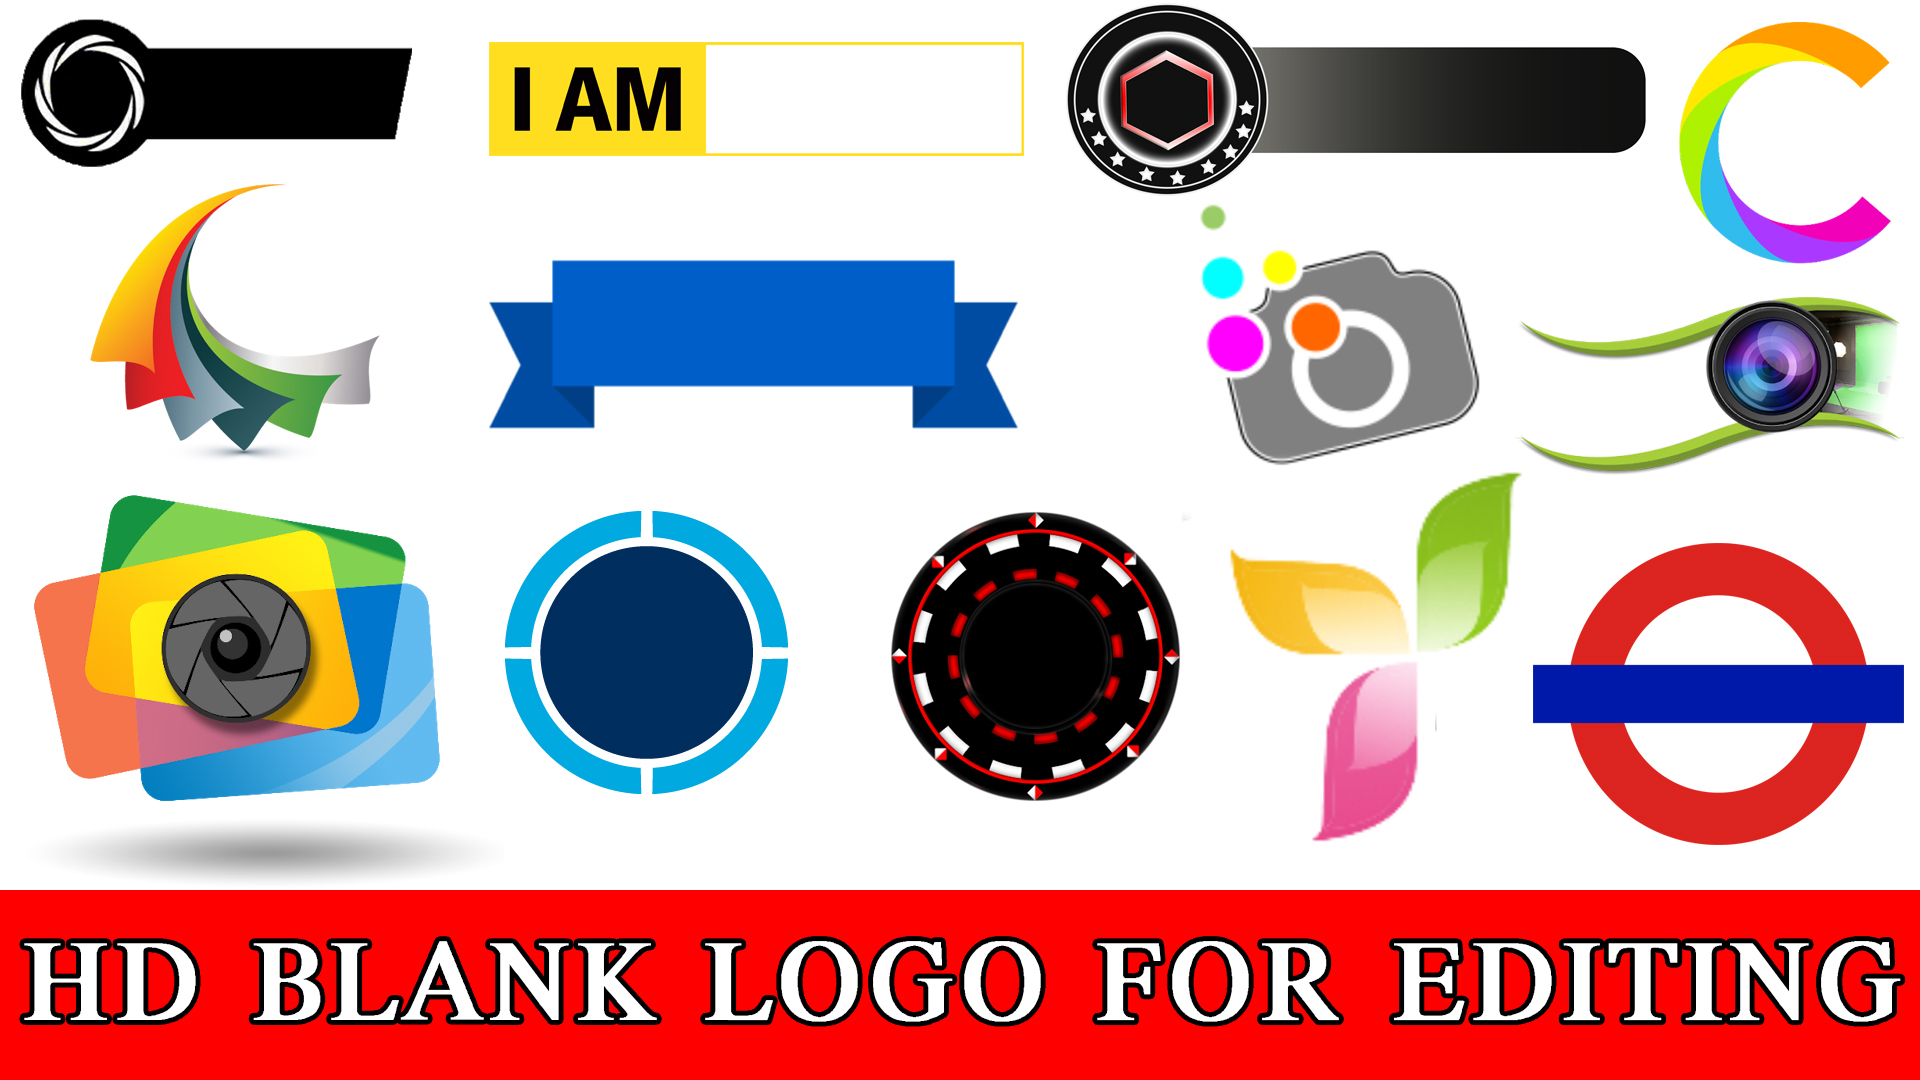 how to edit logo in picsart